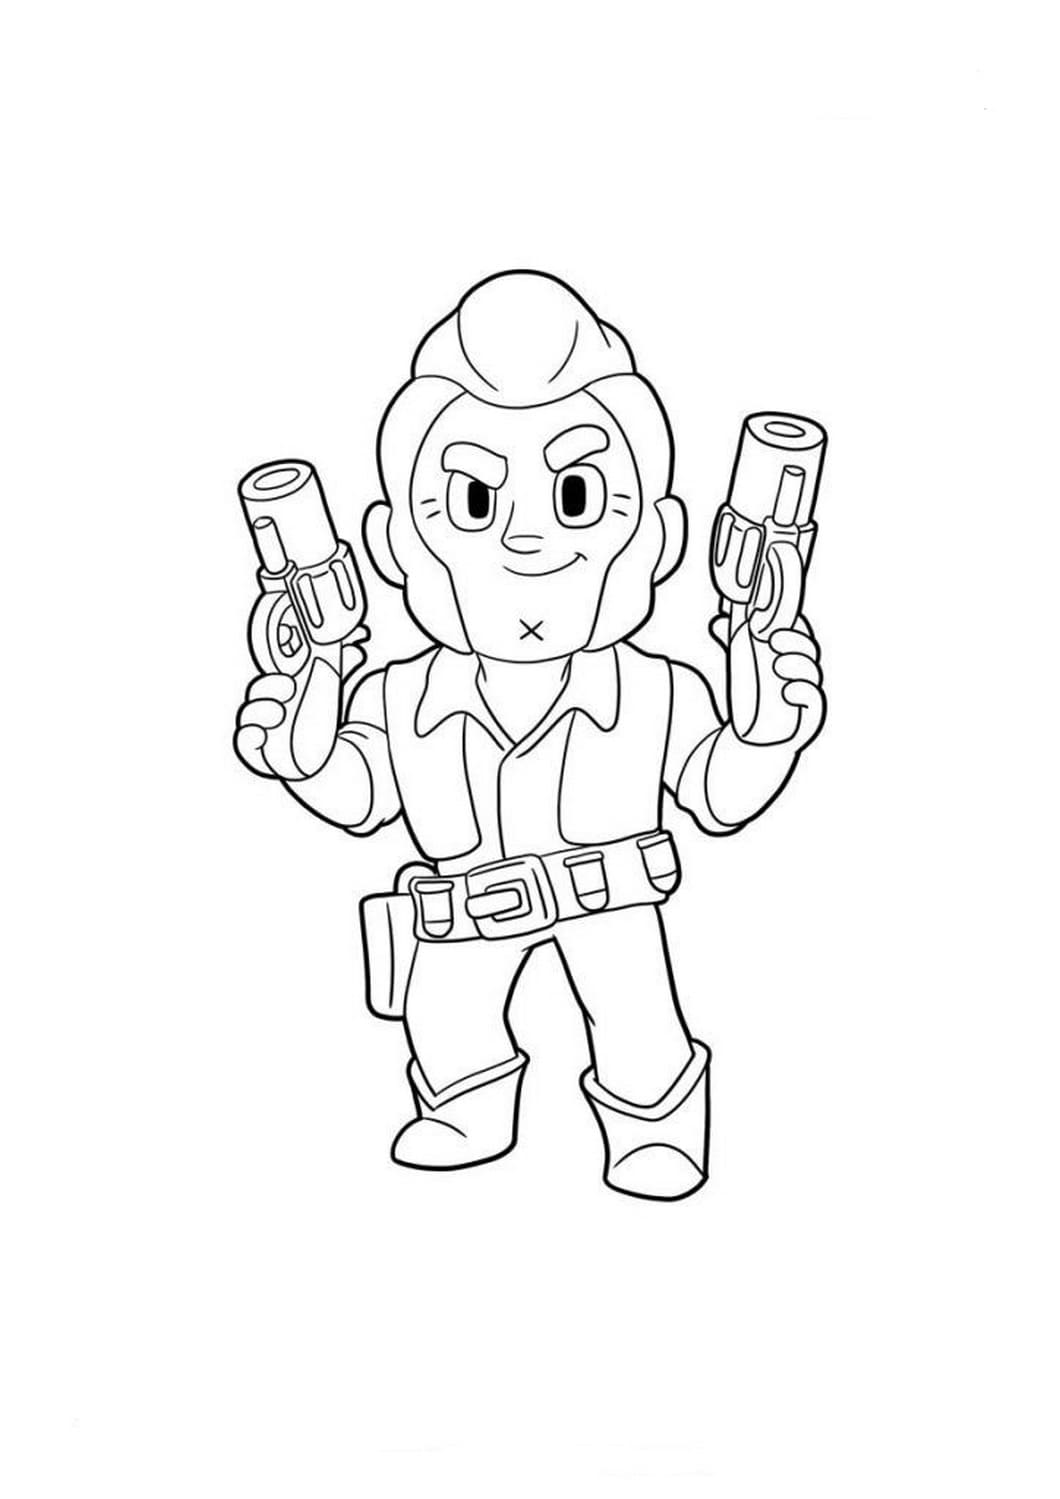 Brawl Stars Coloring Pages 50 Pictures Free Printable - drawing max brawl stars